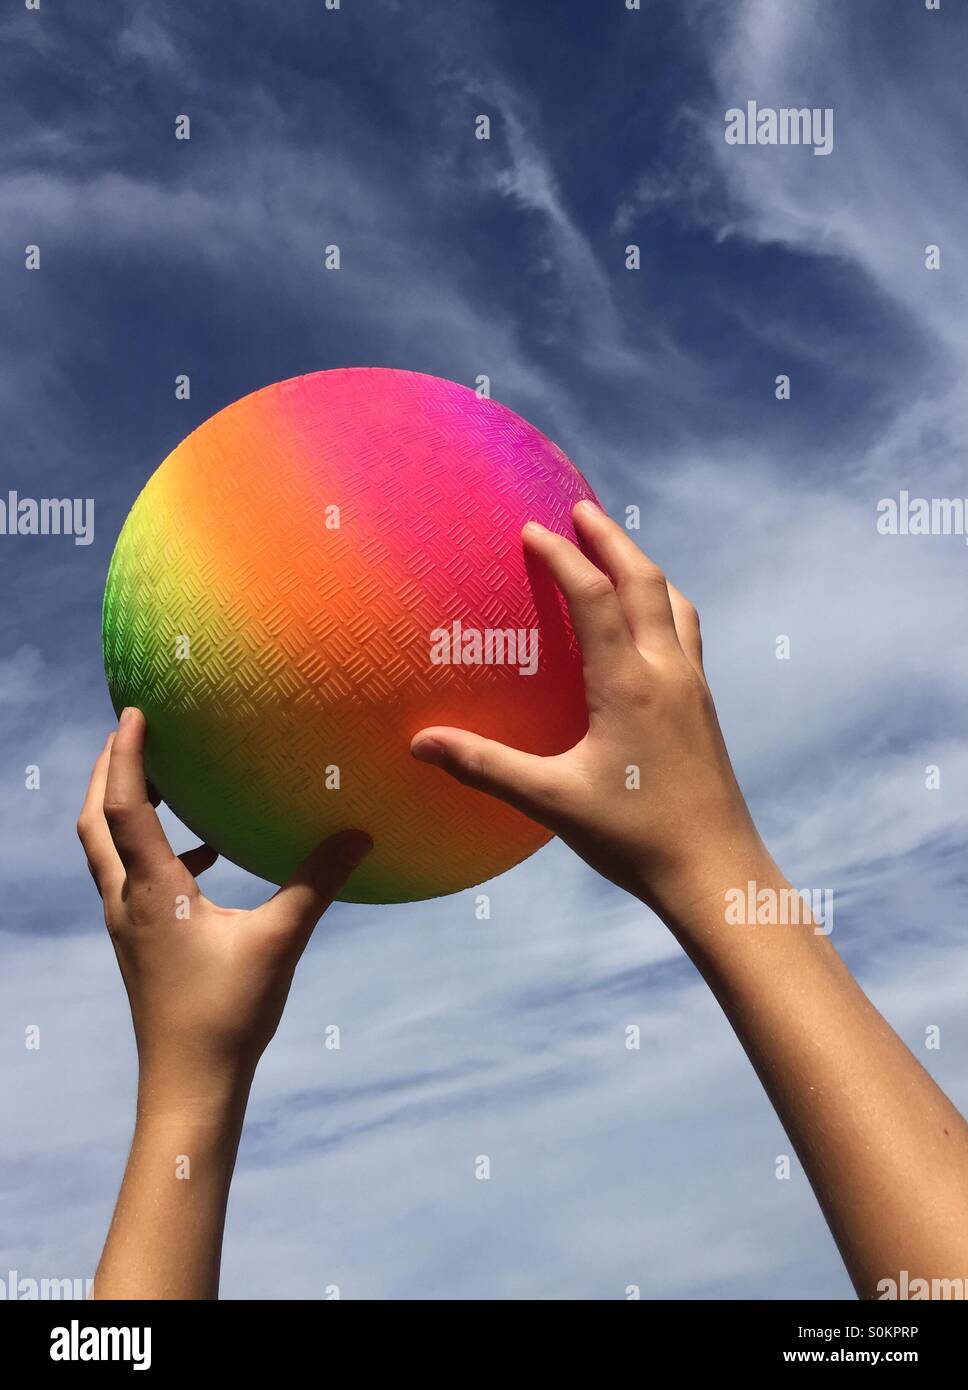 Childs hands catching a rainbow colored rubber ball against a hazy blue sky Stock Photo